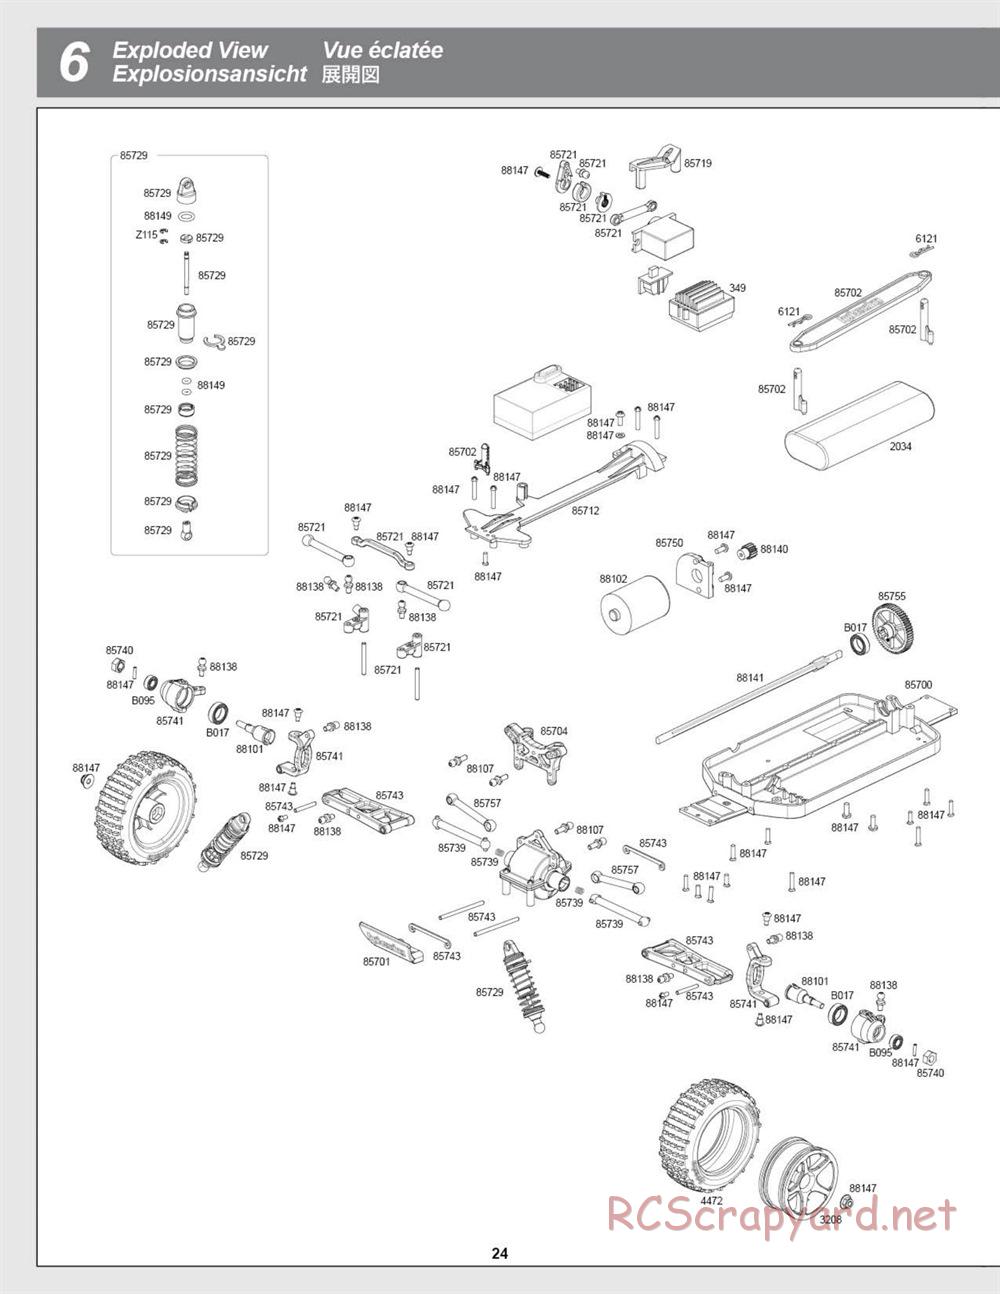 HPI - Brama 18B - Exploded View - Page 24